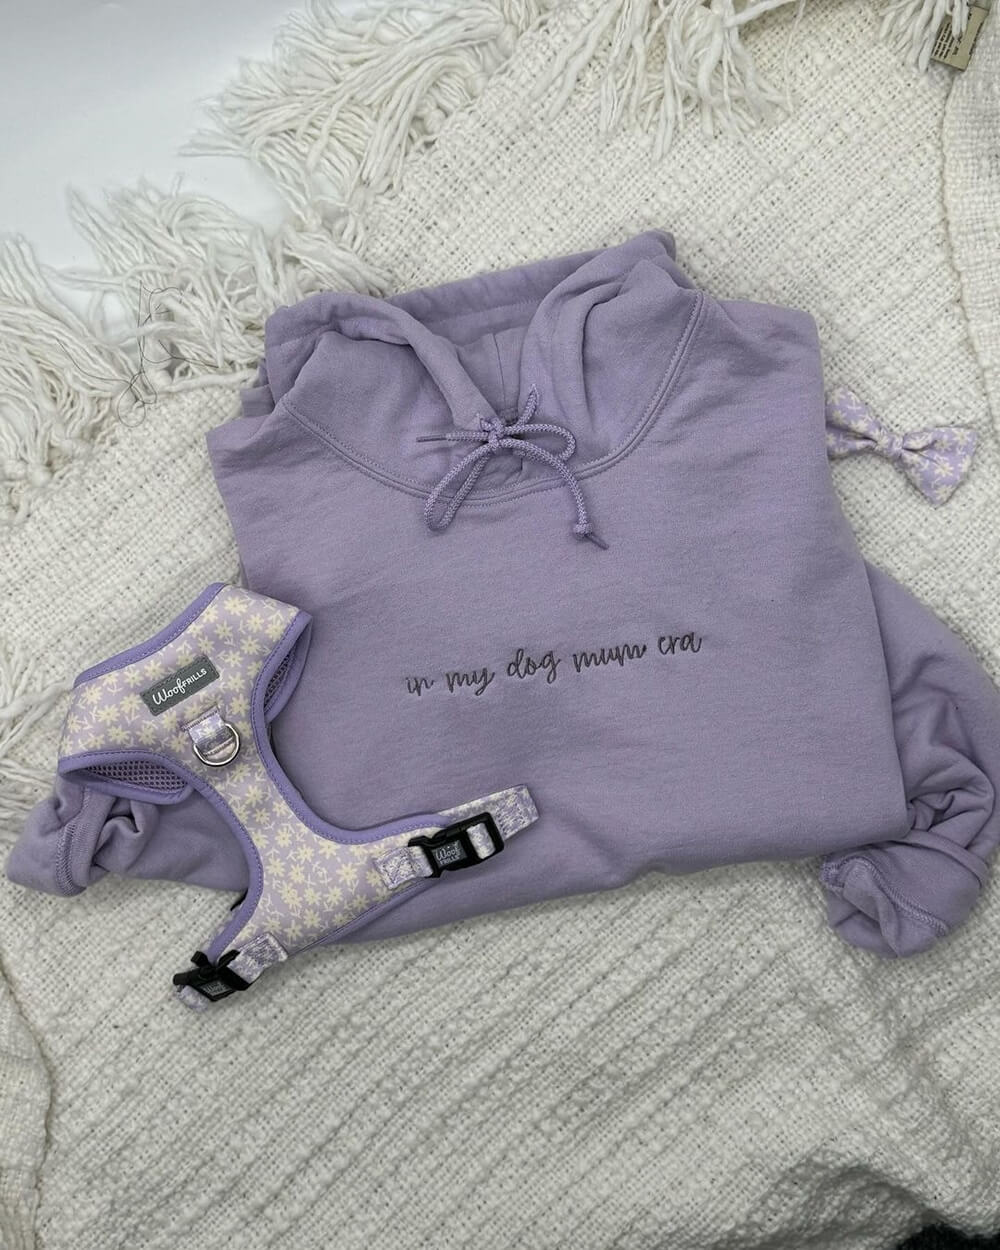 In my dog dad / dog mum era lilac colour sweatshirt for dog lovers by Woof Frills